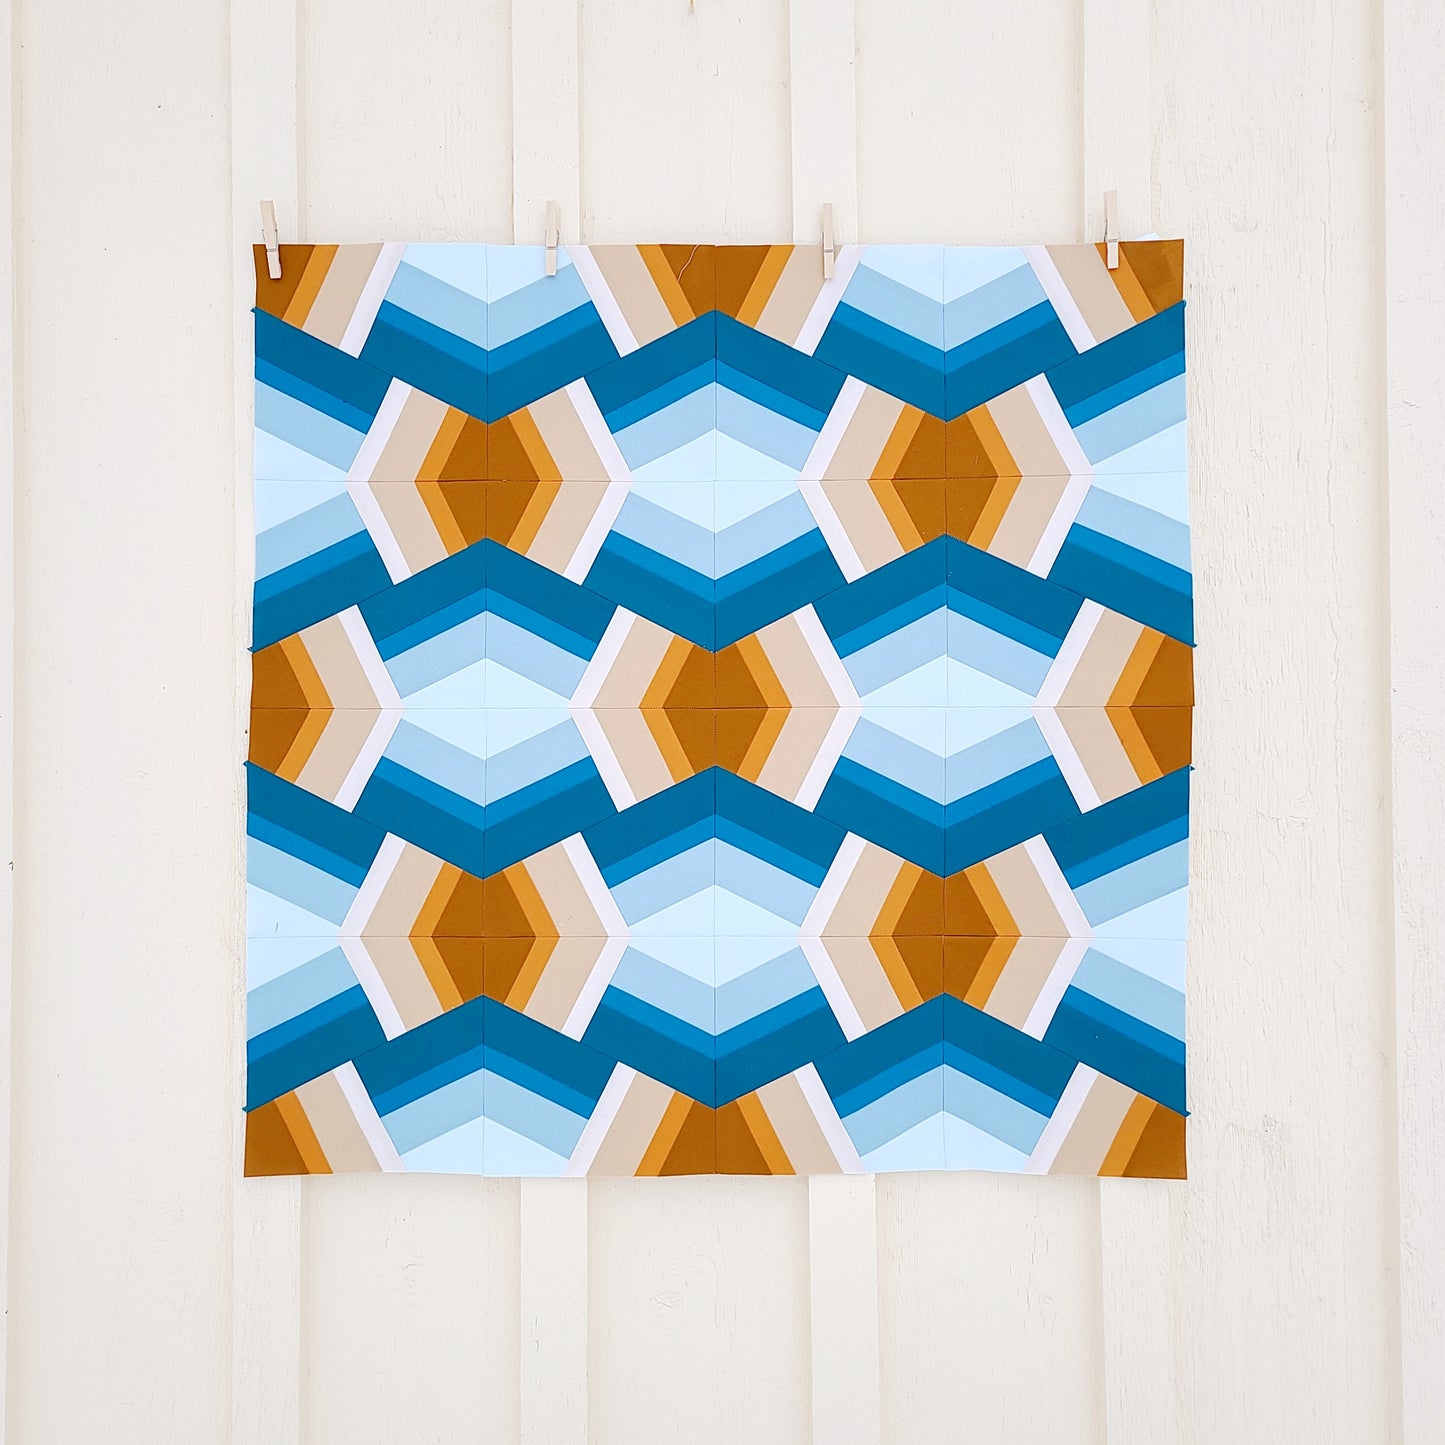 A blue and orange Bracken quilt hangs on a white wall.